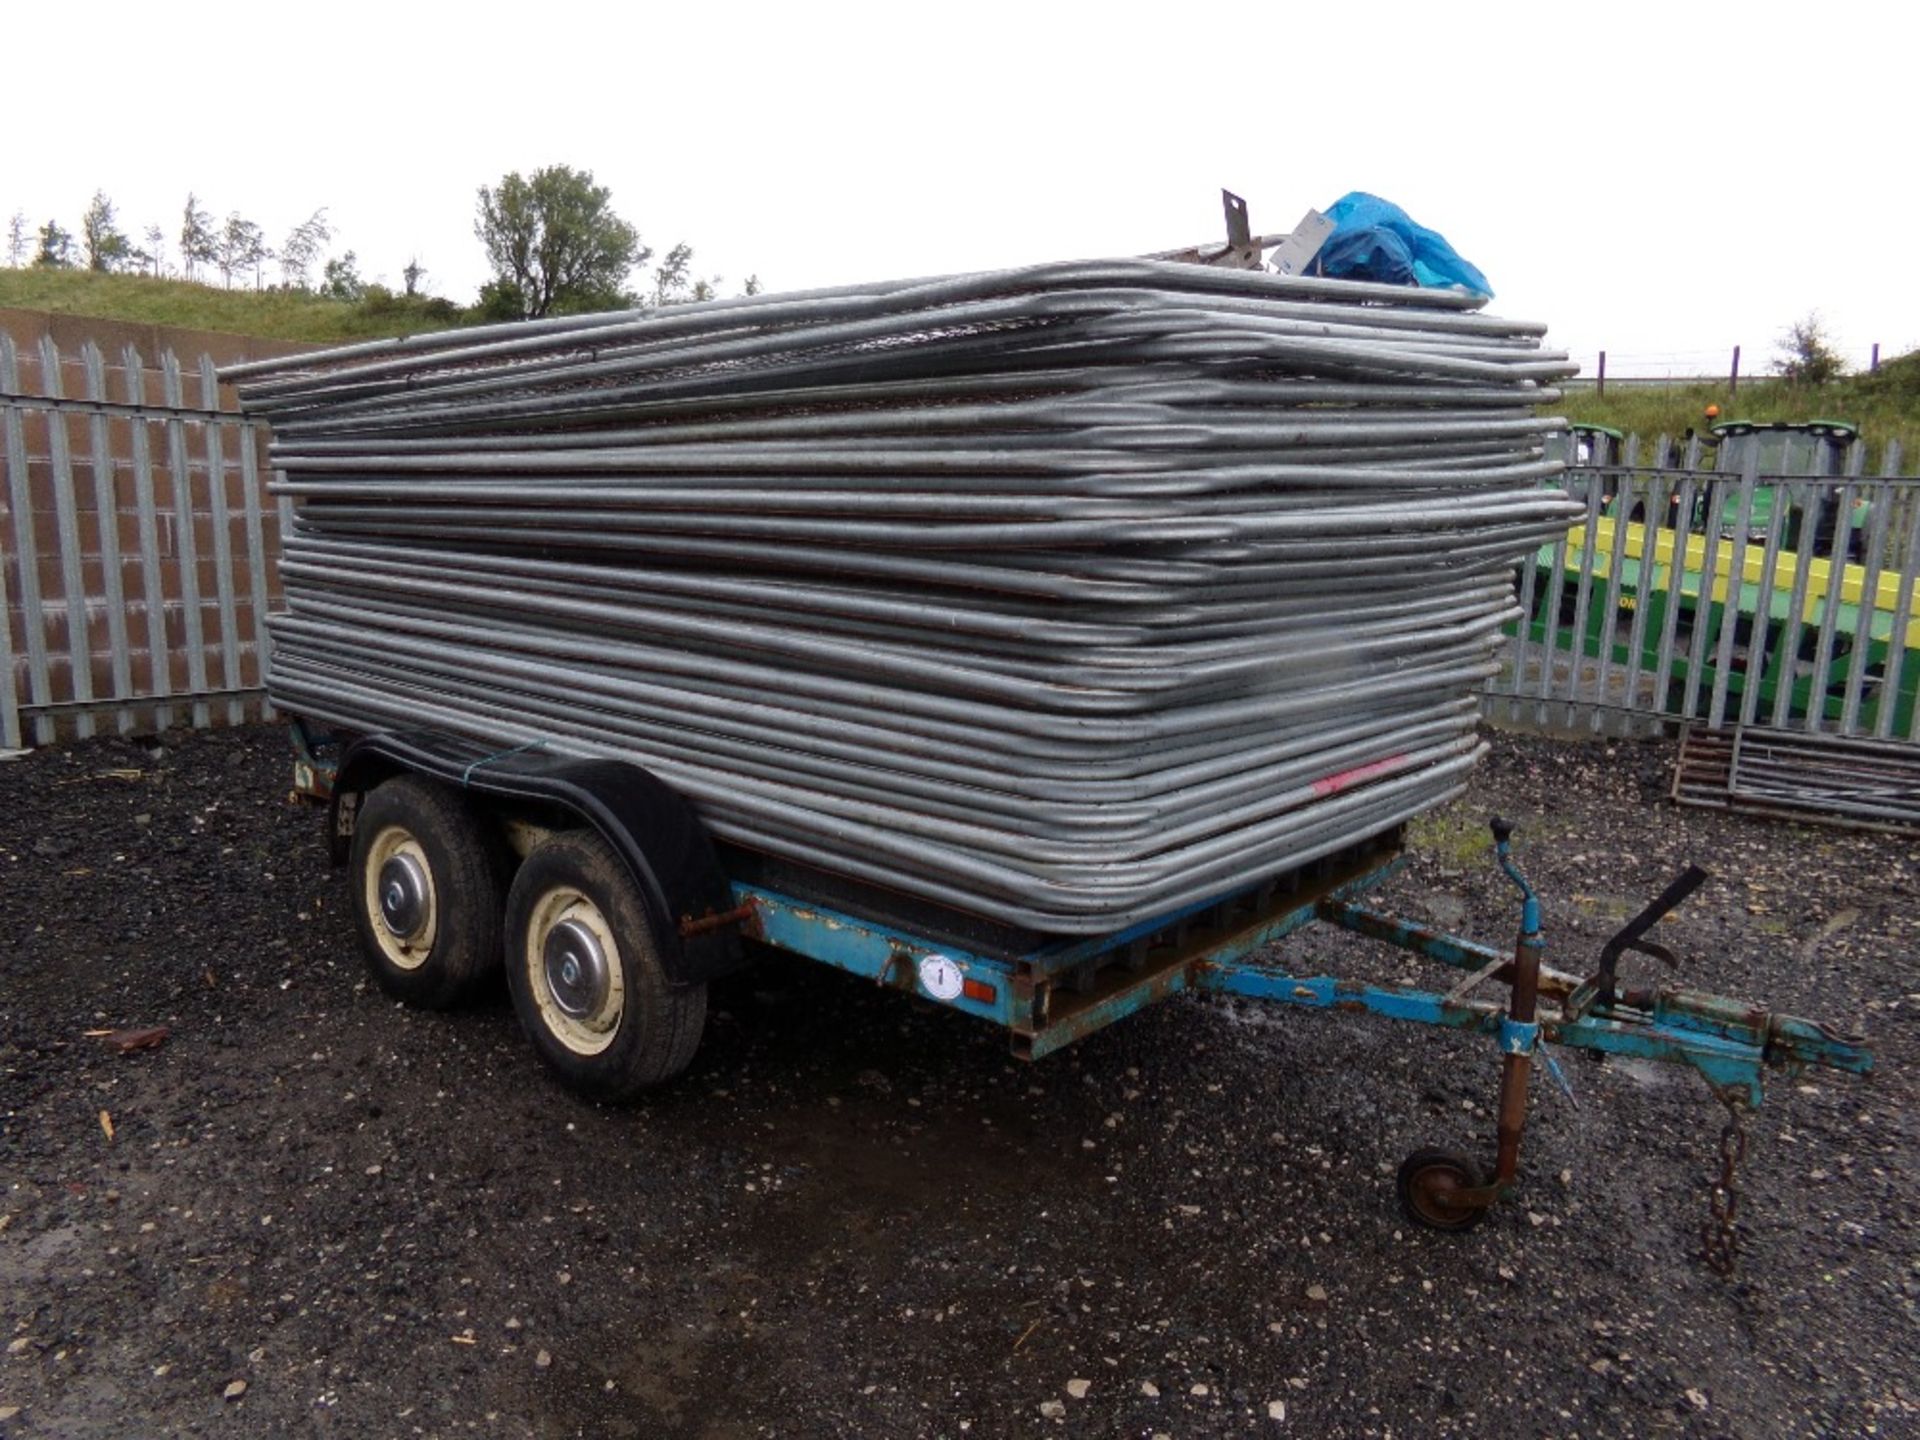 34 SECURITY FENCE PANELS ON A 4 WHEELED